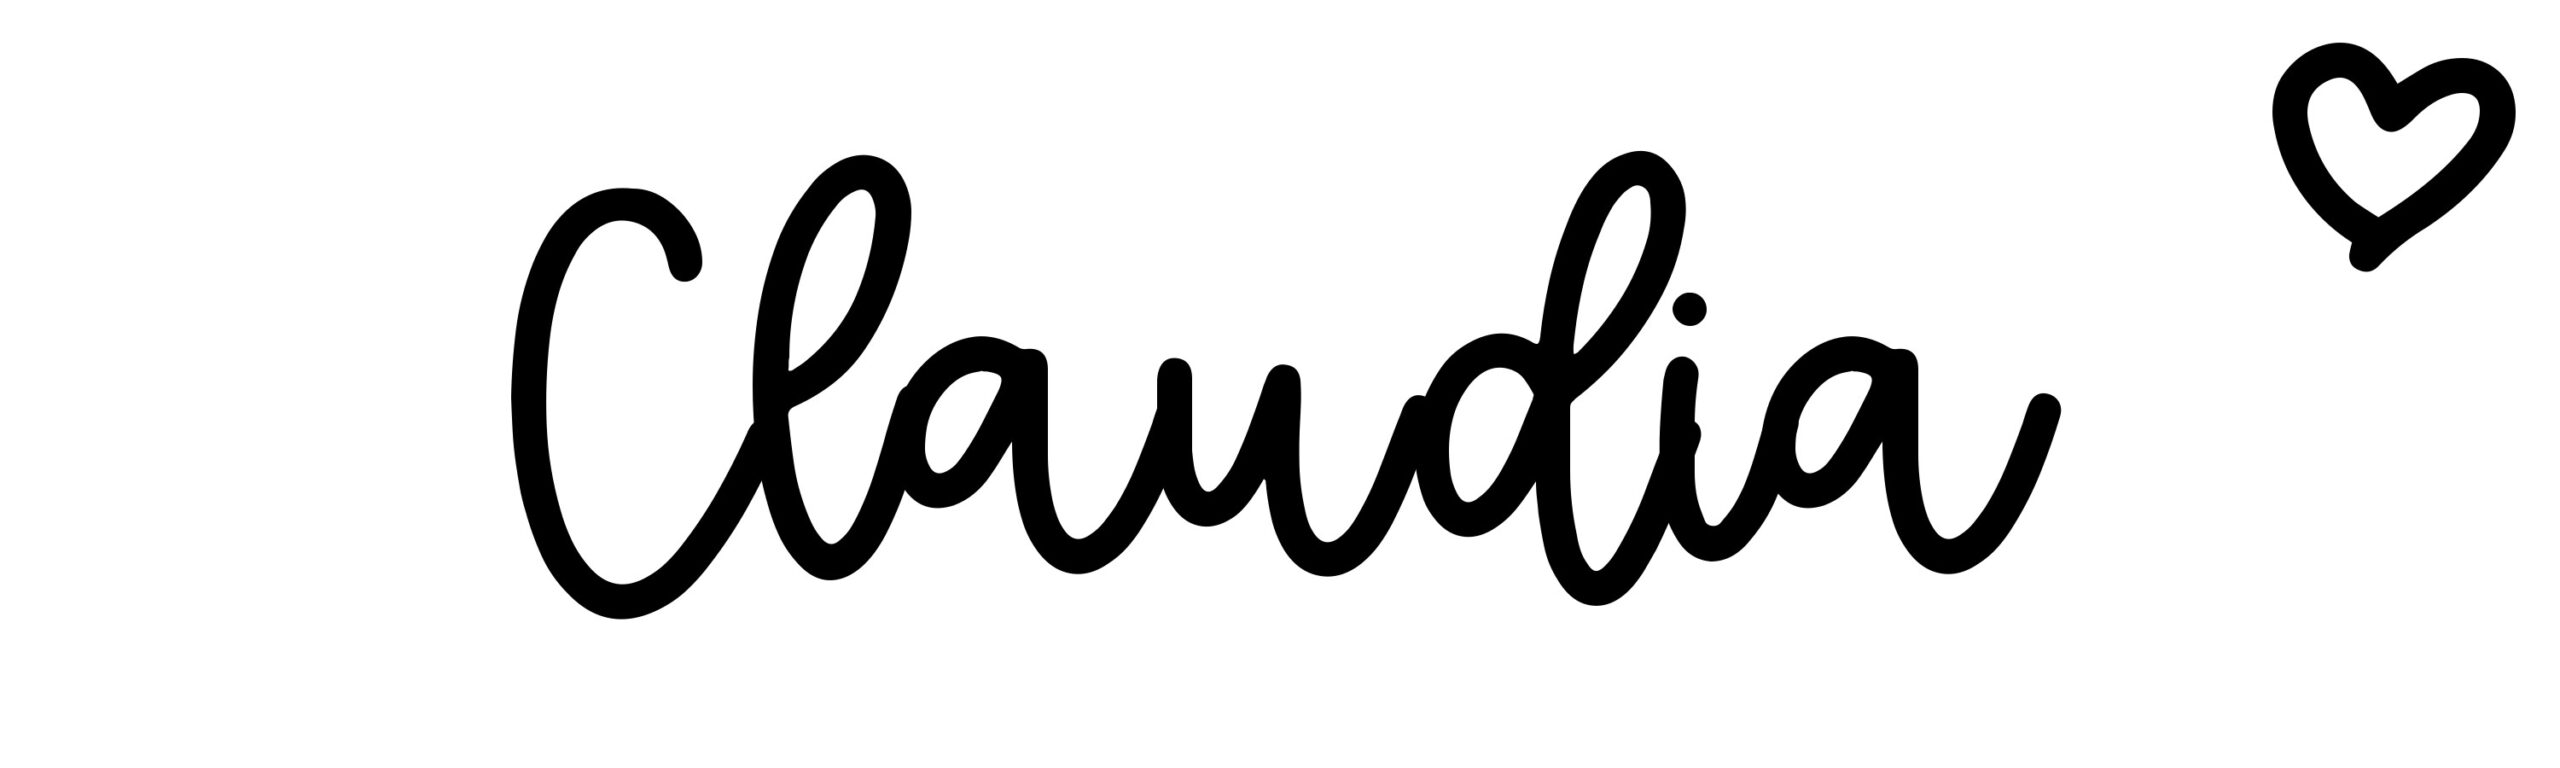 Claudia - Name meaning, origin, variations and more